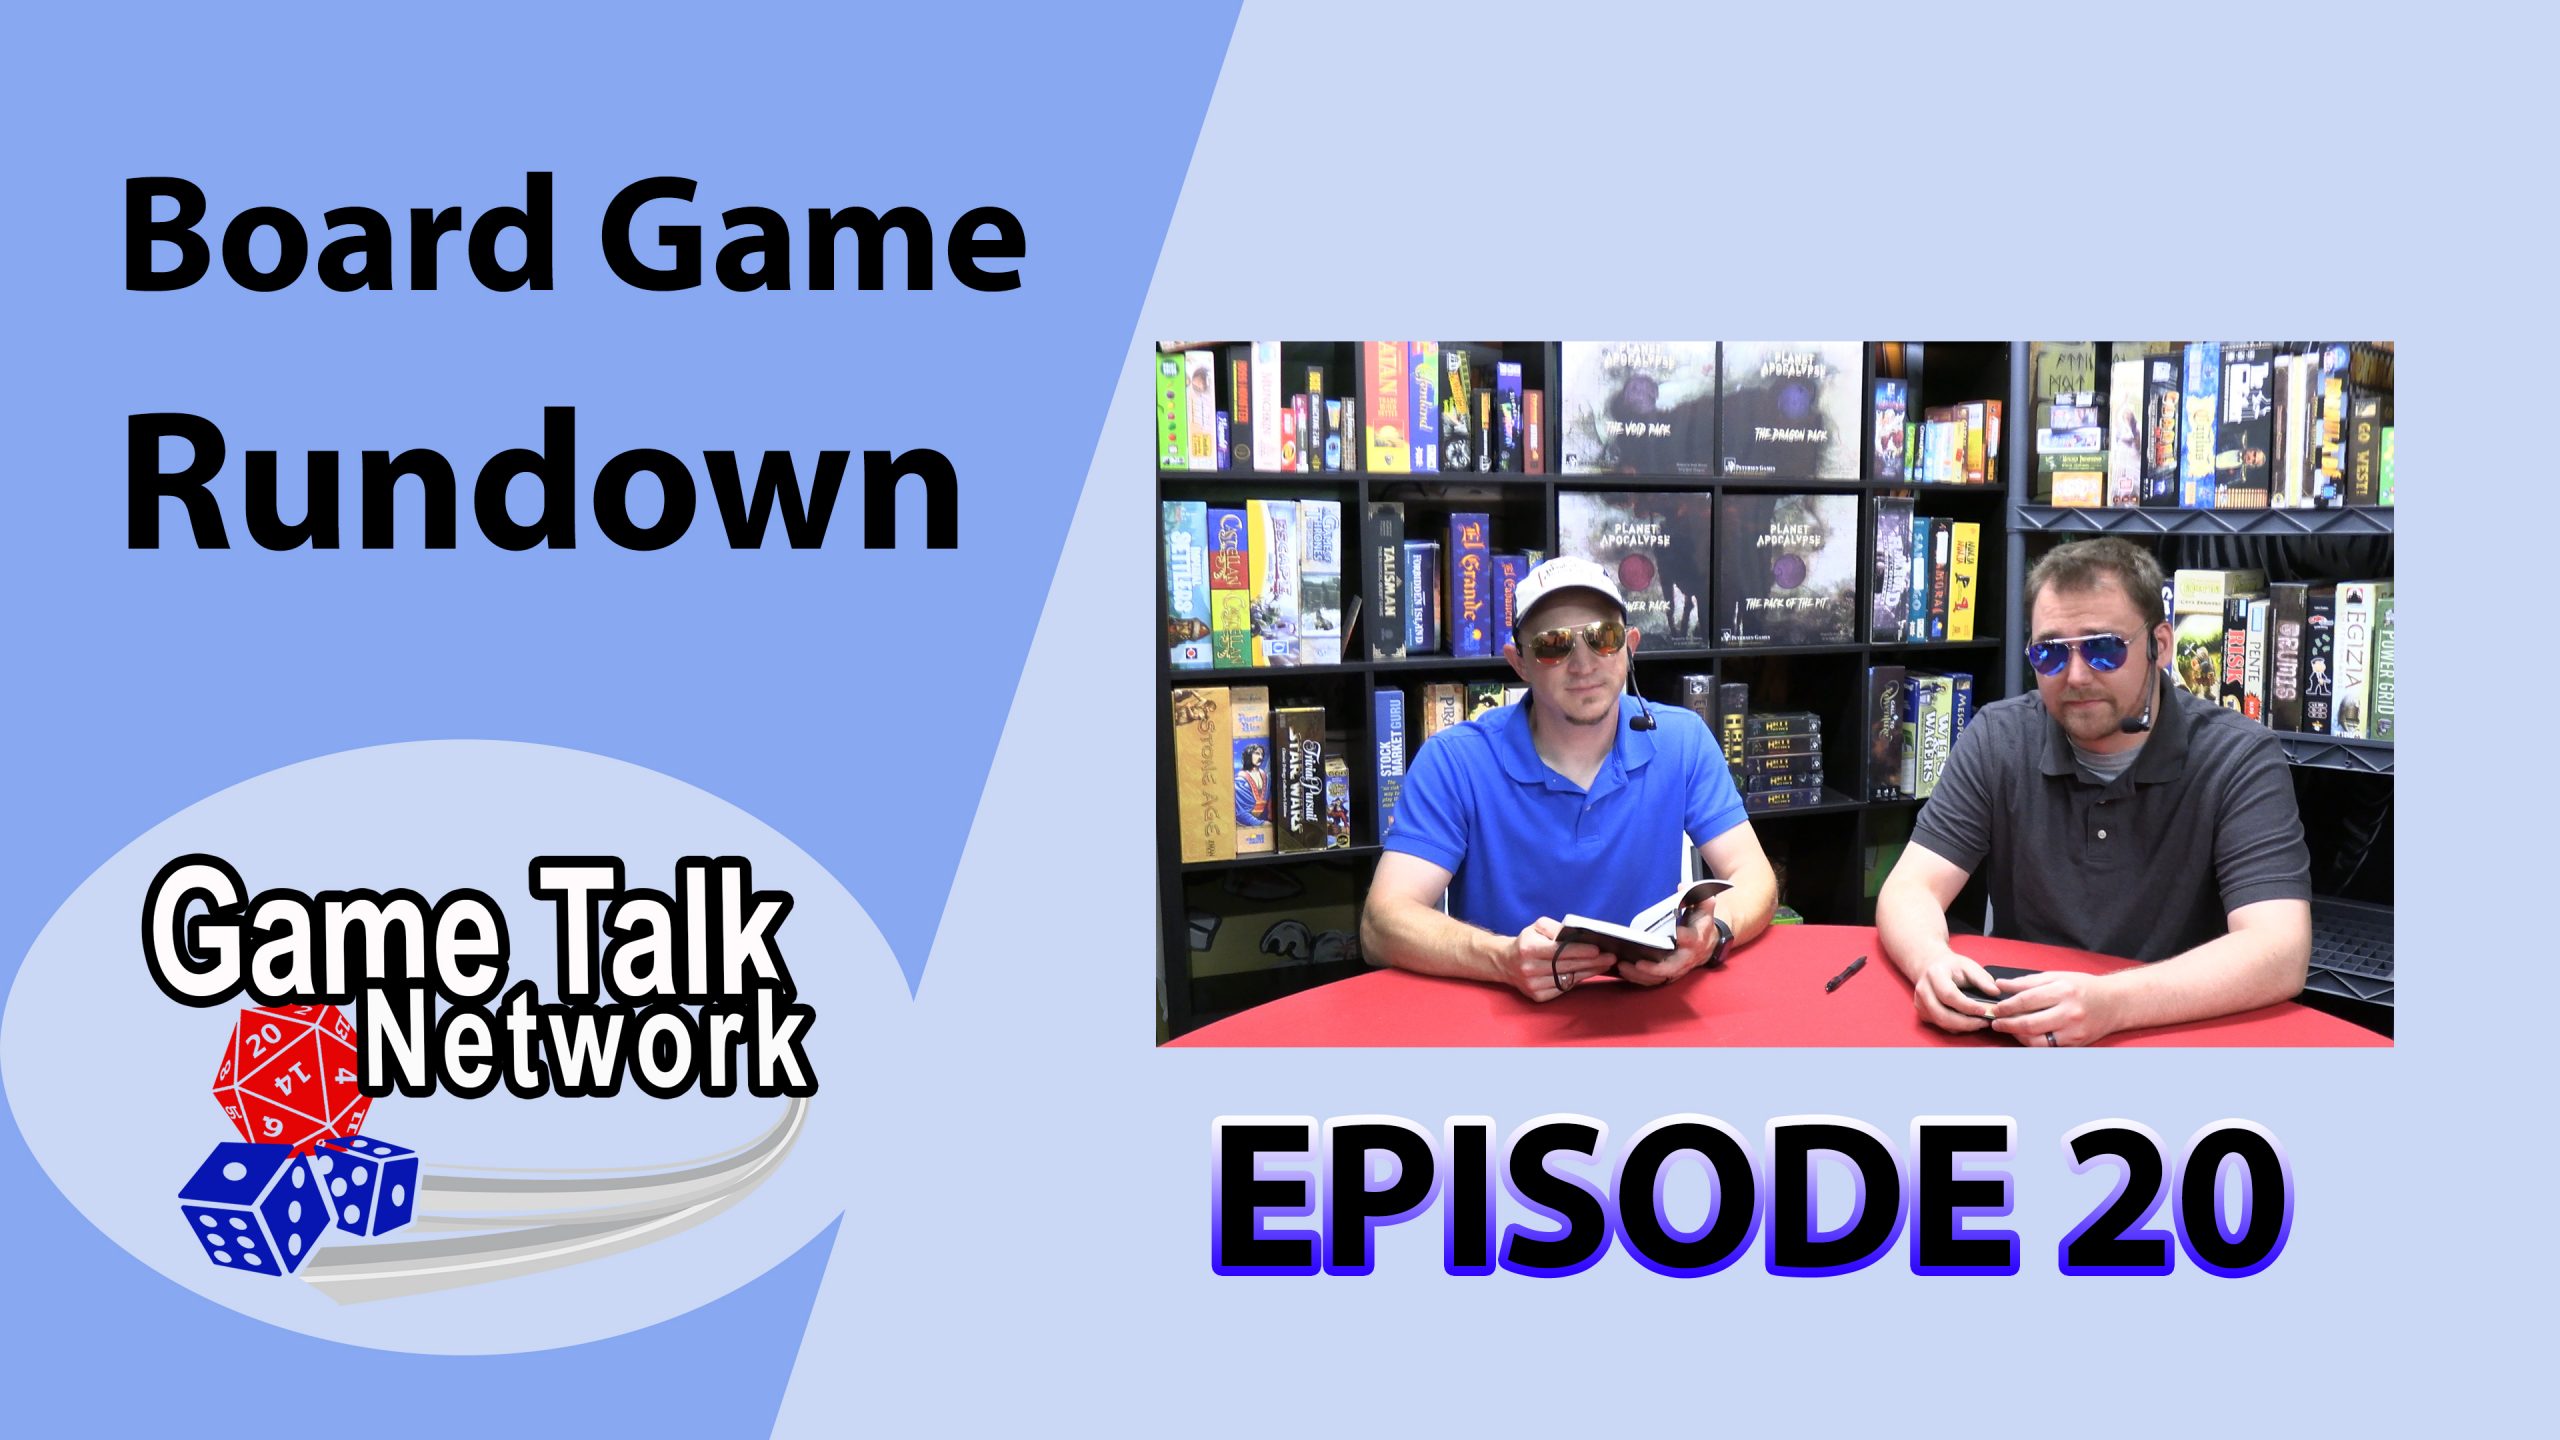 Board Game Rundown Episode 20: Shades are Cool